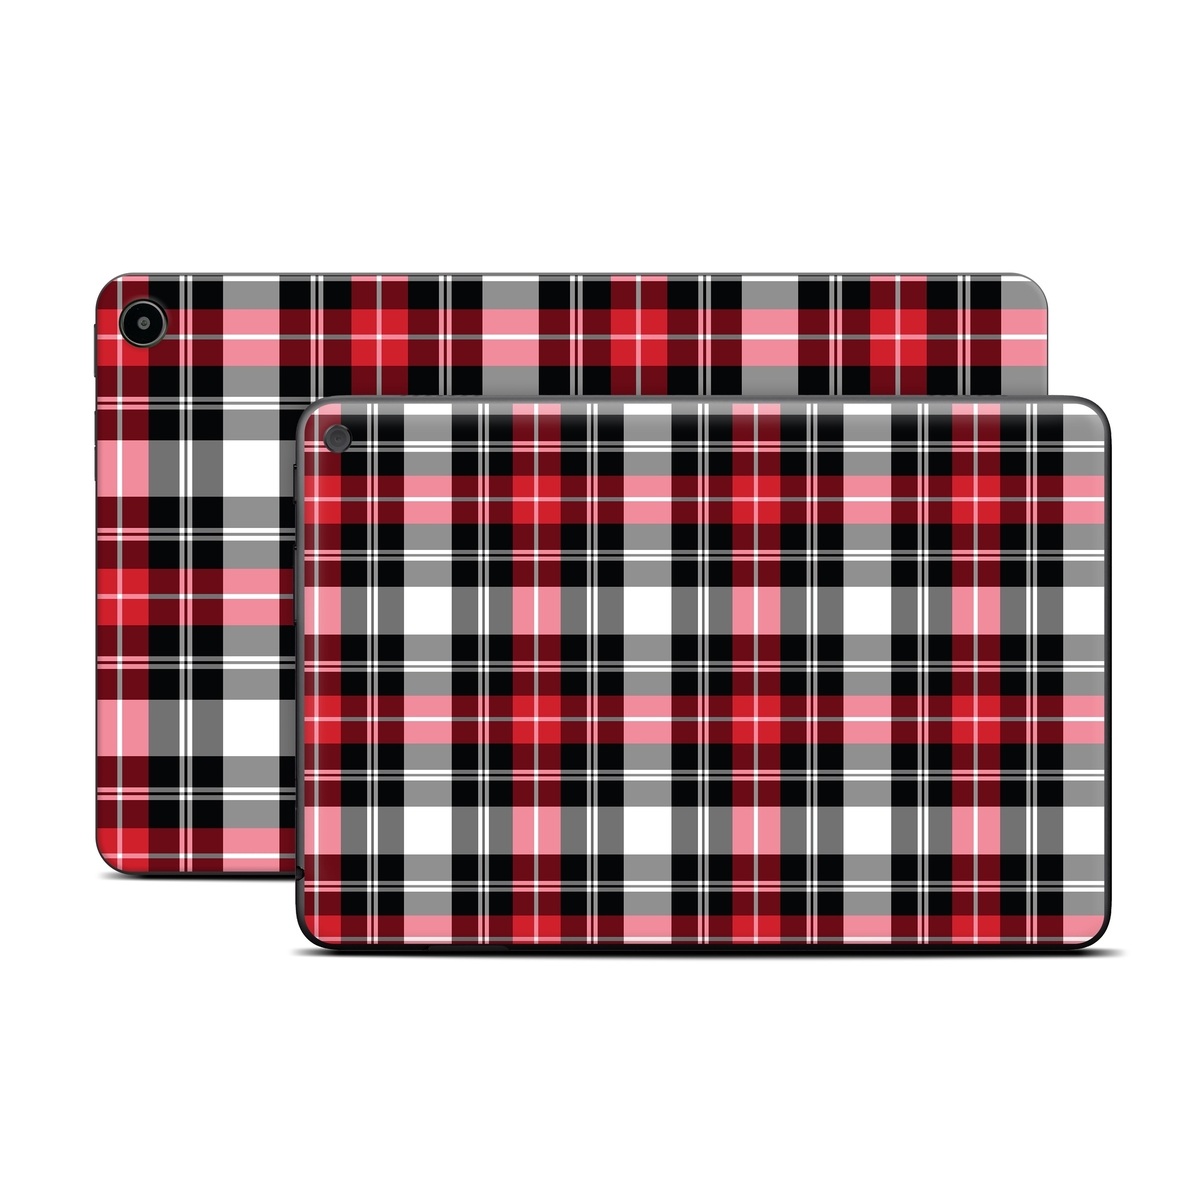  Skin design of Plaid, Tartan, Pattern, Red, Textile, Design, Line, Pink, Magenta, Square, with black, gray, pink, red, white colors